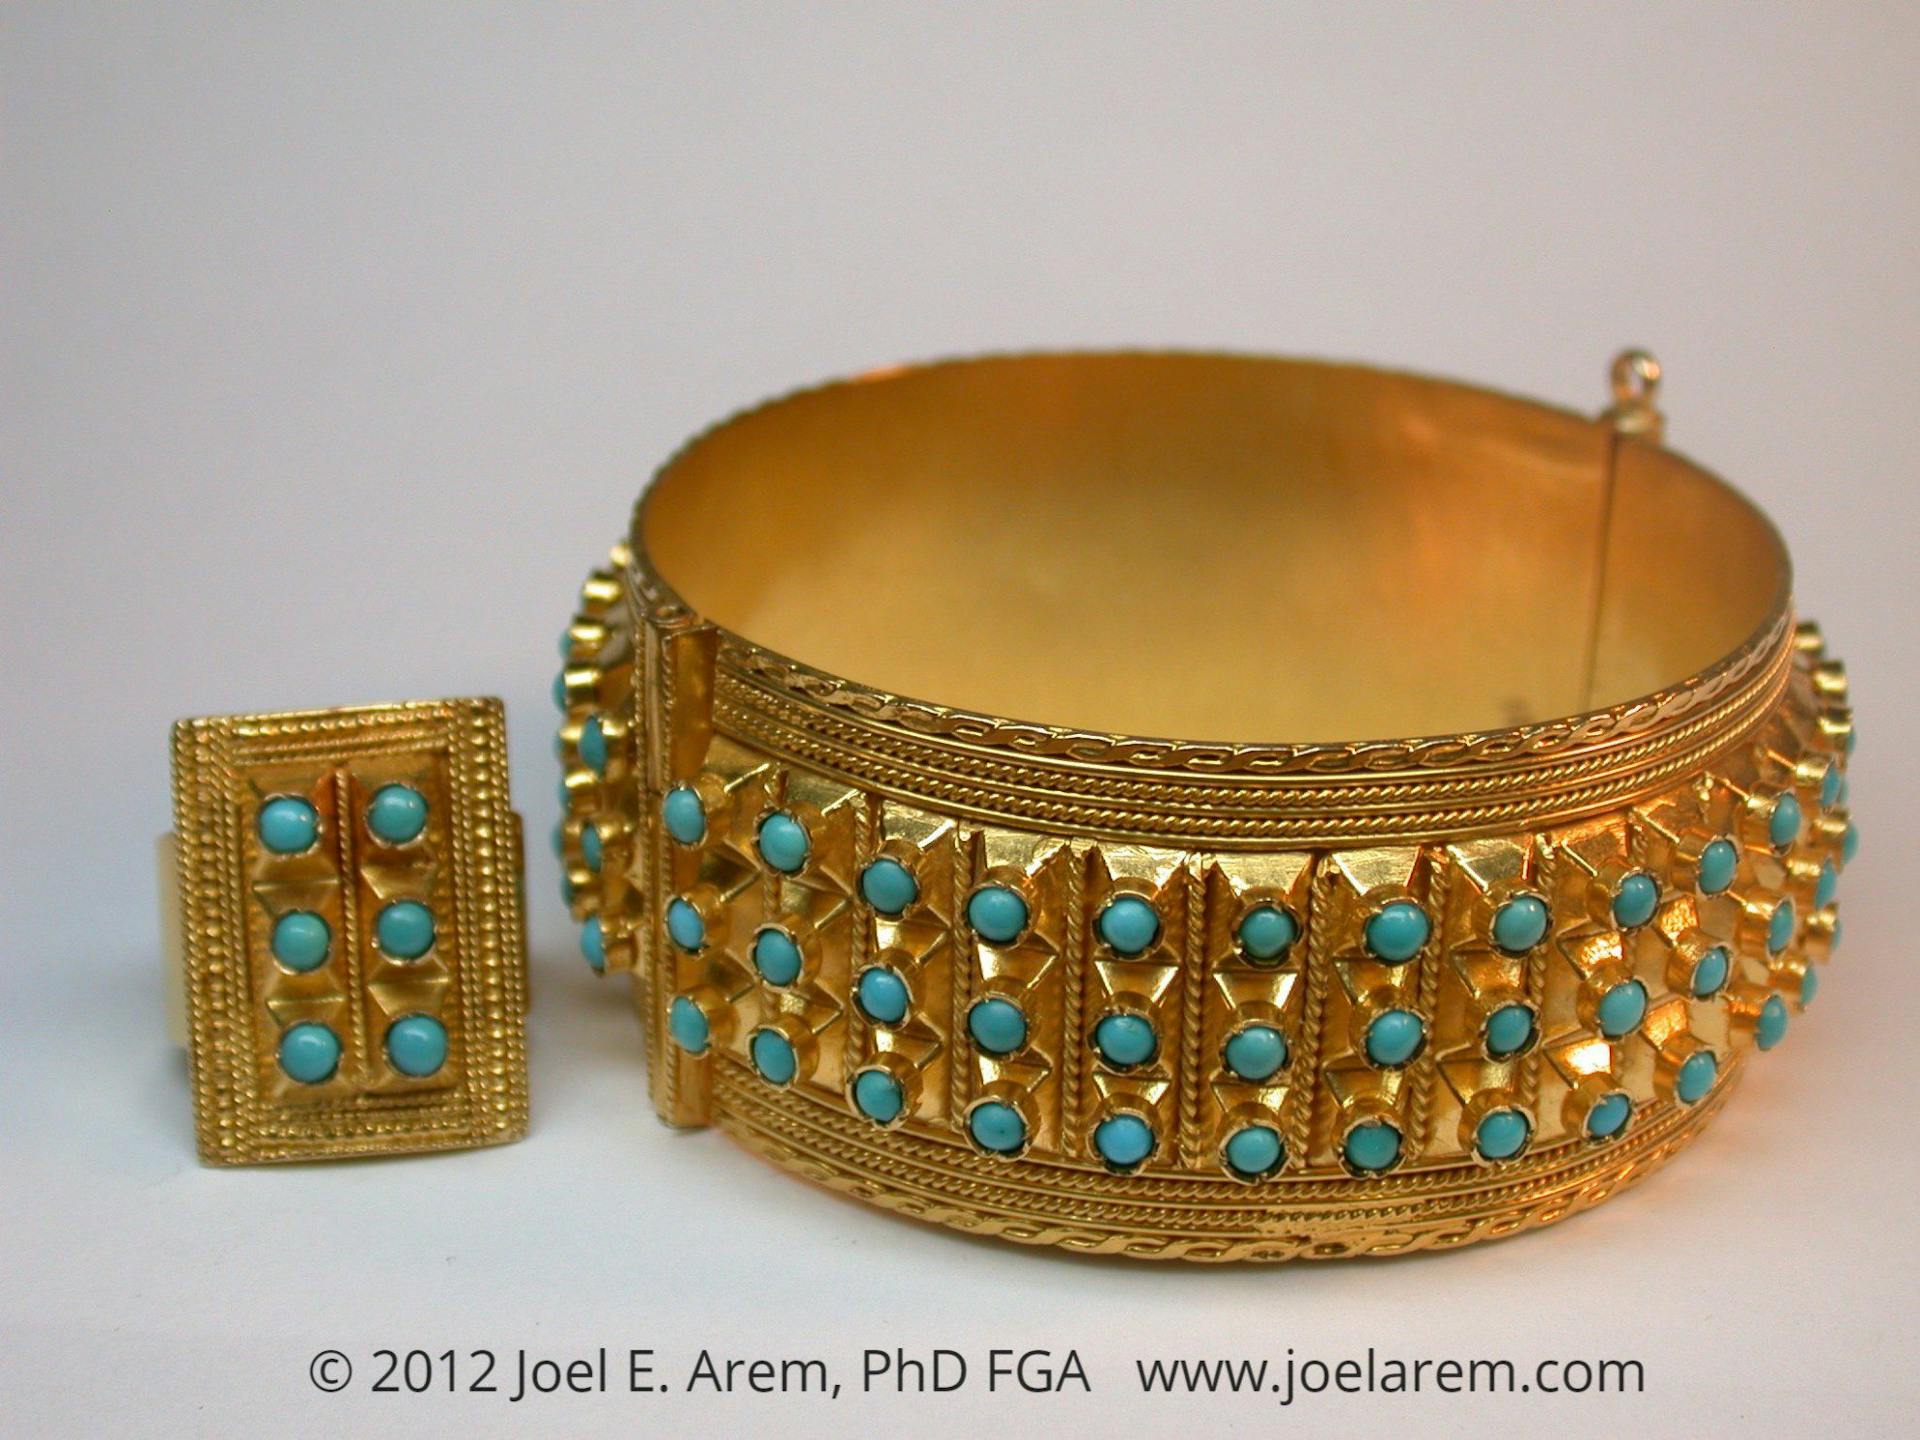 Turquoise bracelet and ring - Iran